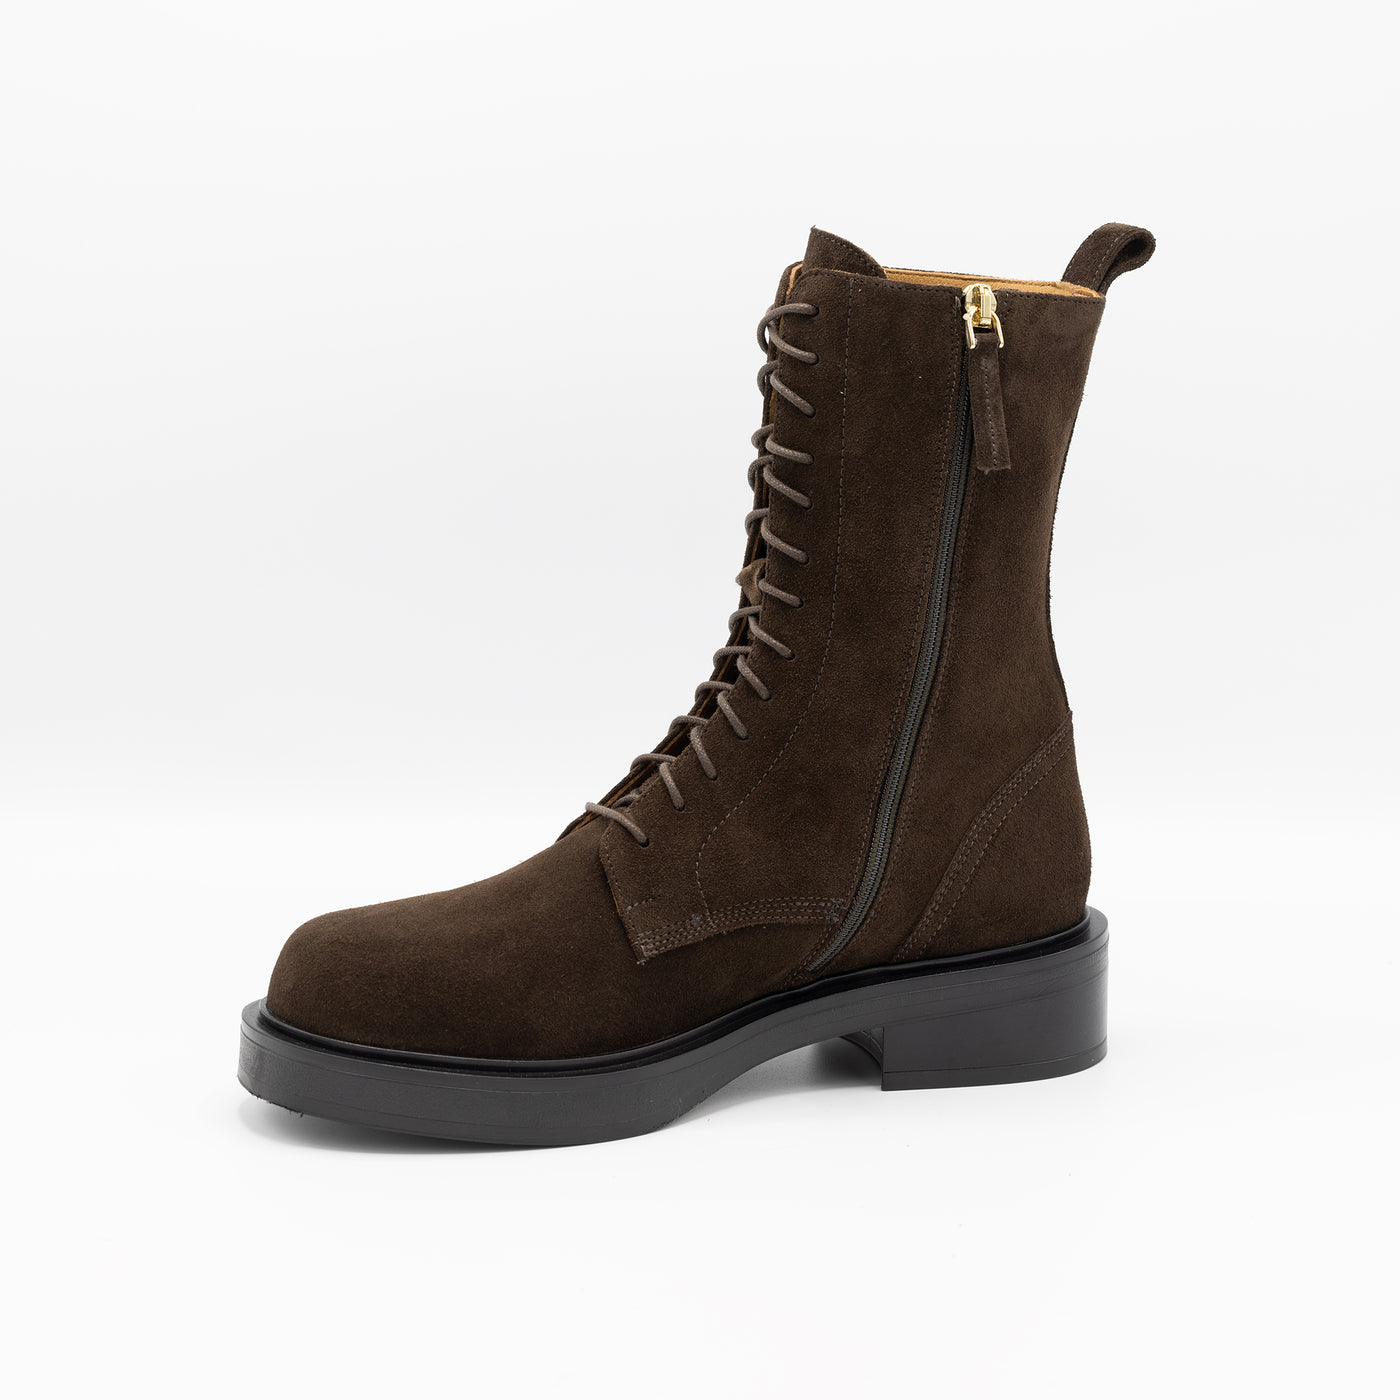 Brown suede leather combat boots with zipper